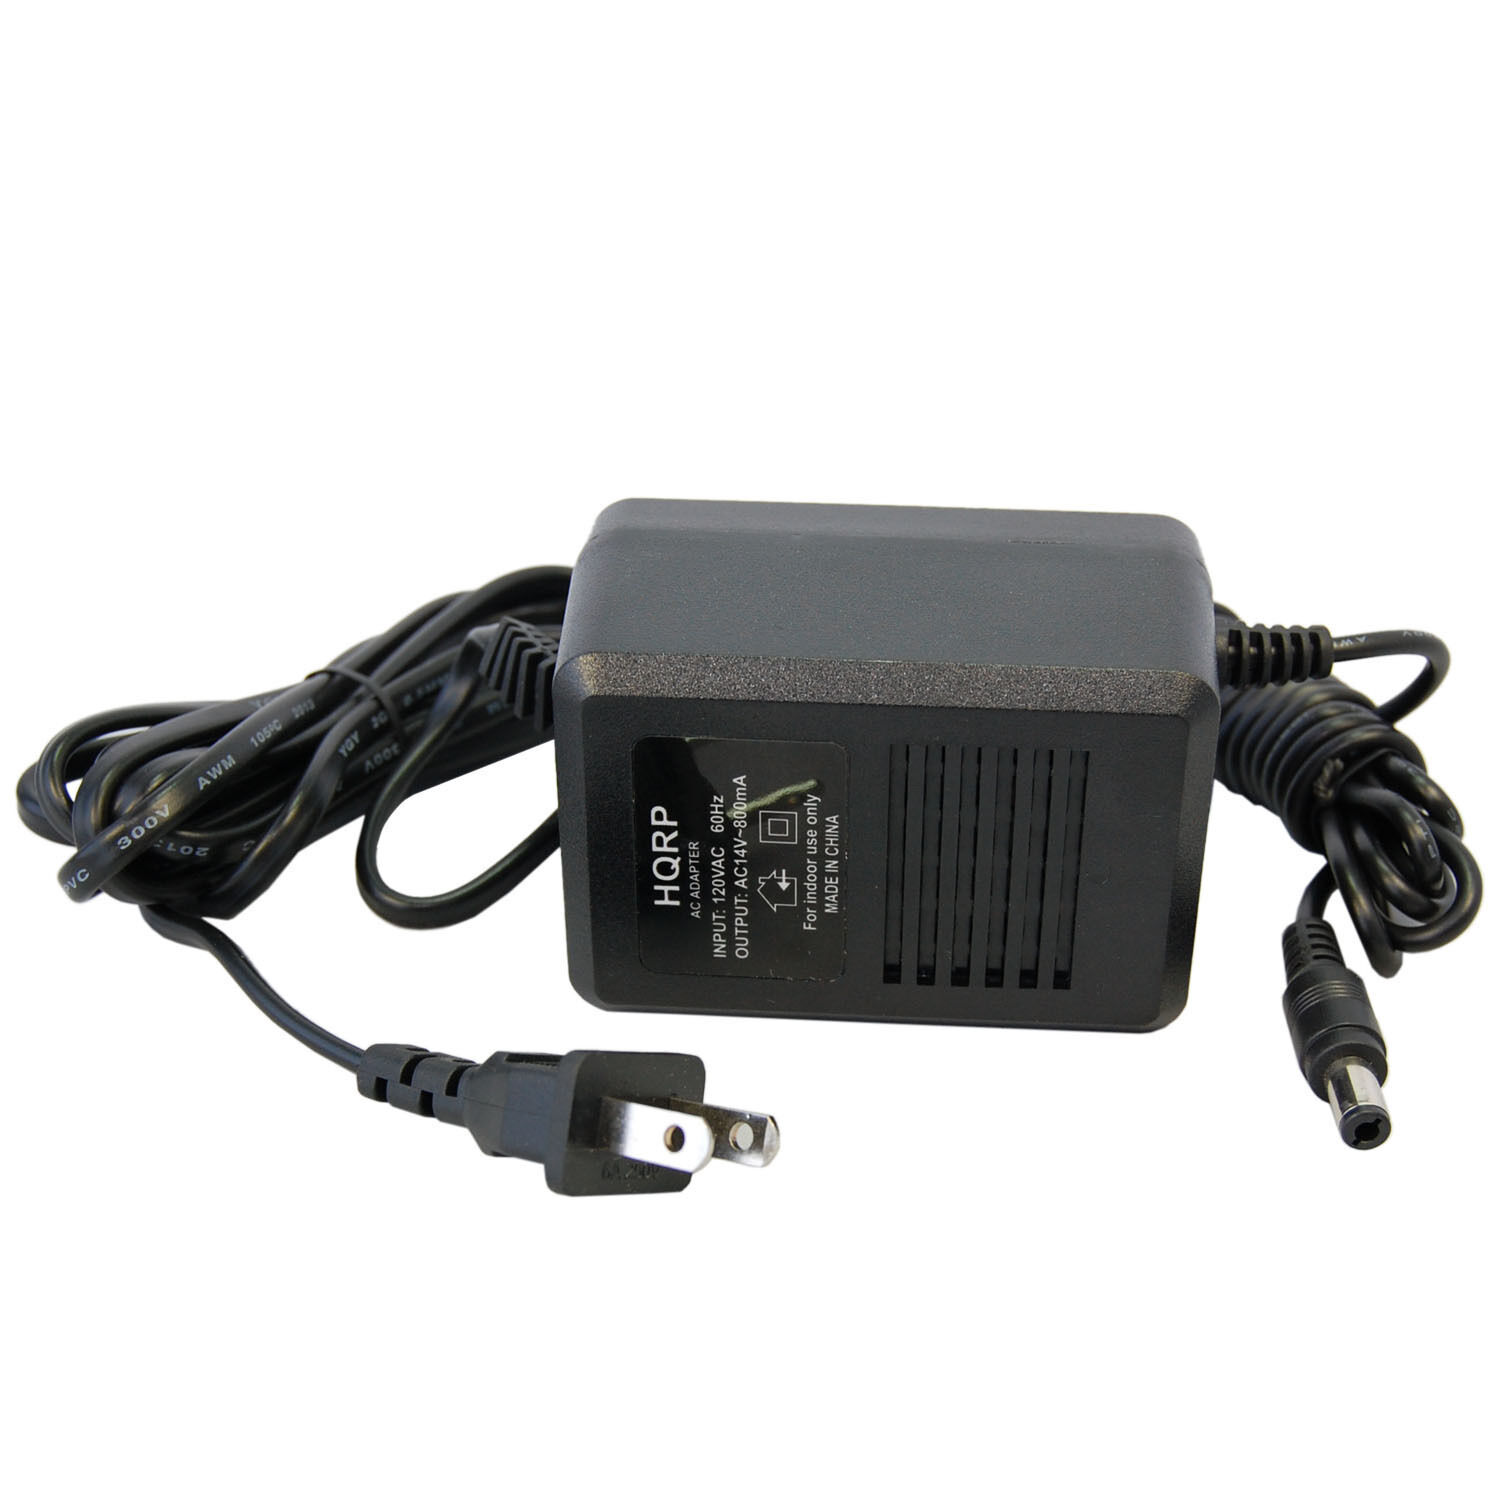 AC Adapter Power Supply for Roland BRC-120 GR-33 GR-20 AF-70 MPN: 8877767137 Output Current: 800 mAh Type: AC Power